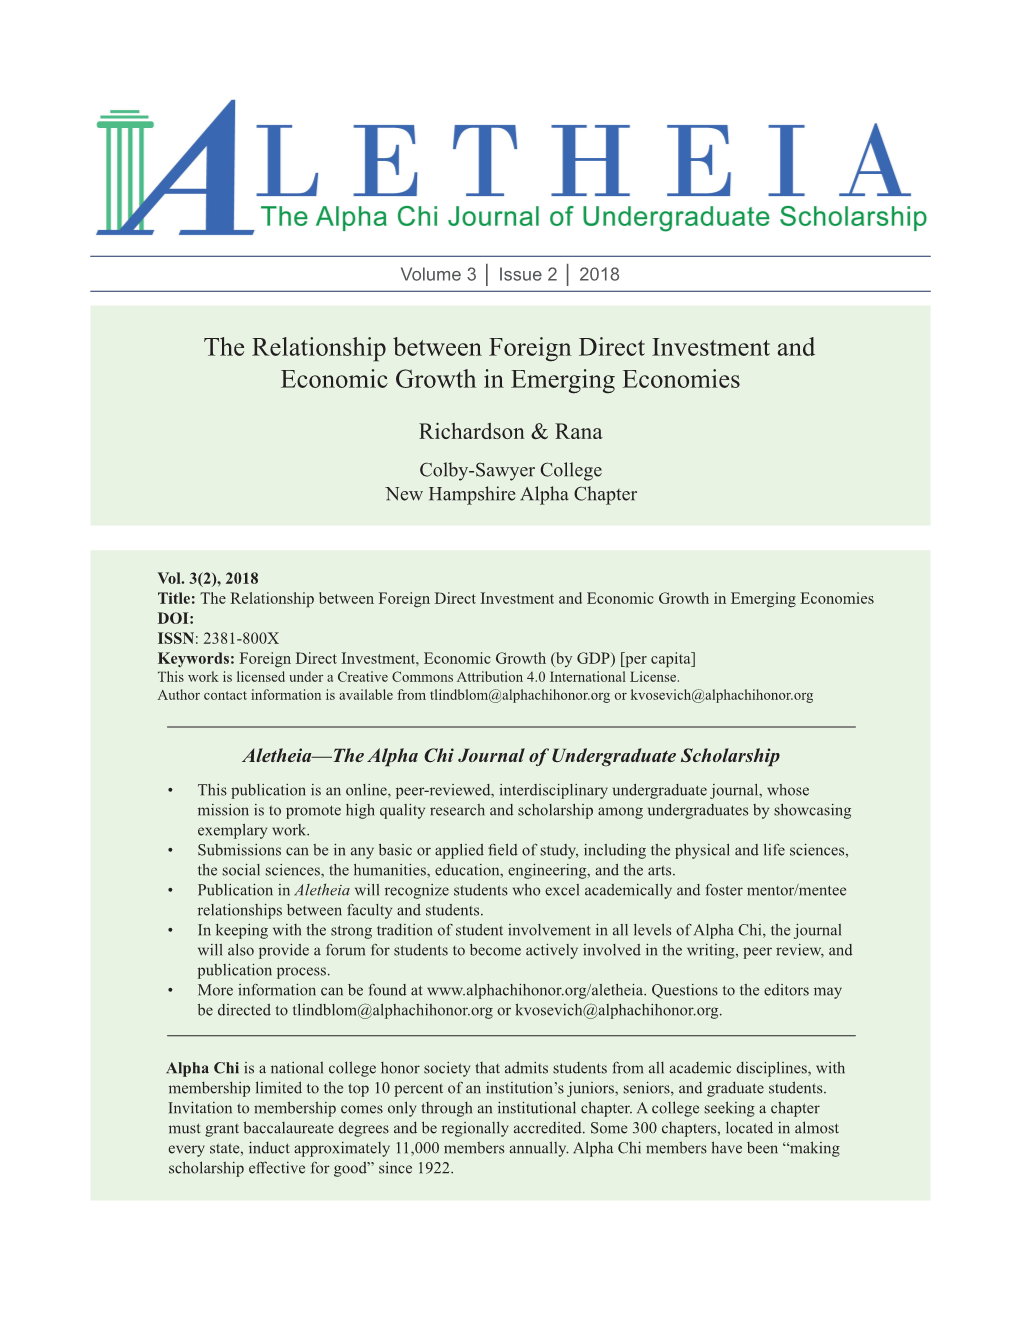 The Relationship Between Foreign Direct Investment and Economic Growth in Emerging Economies